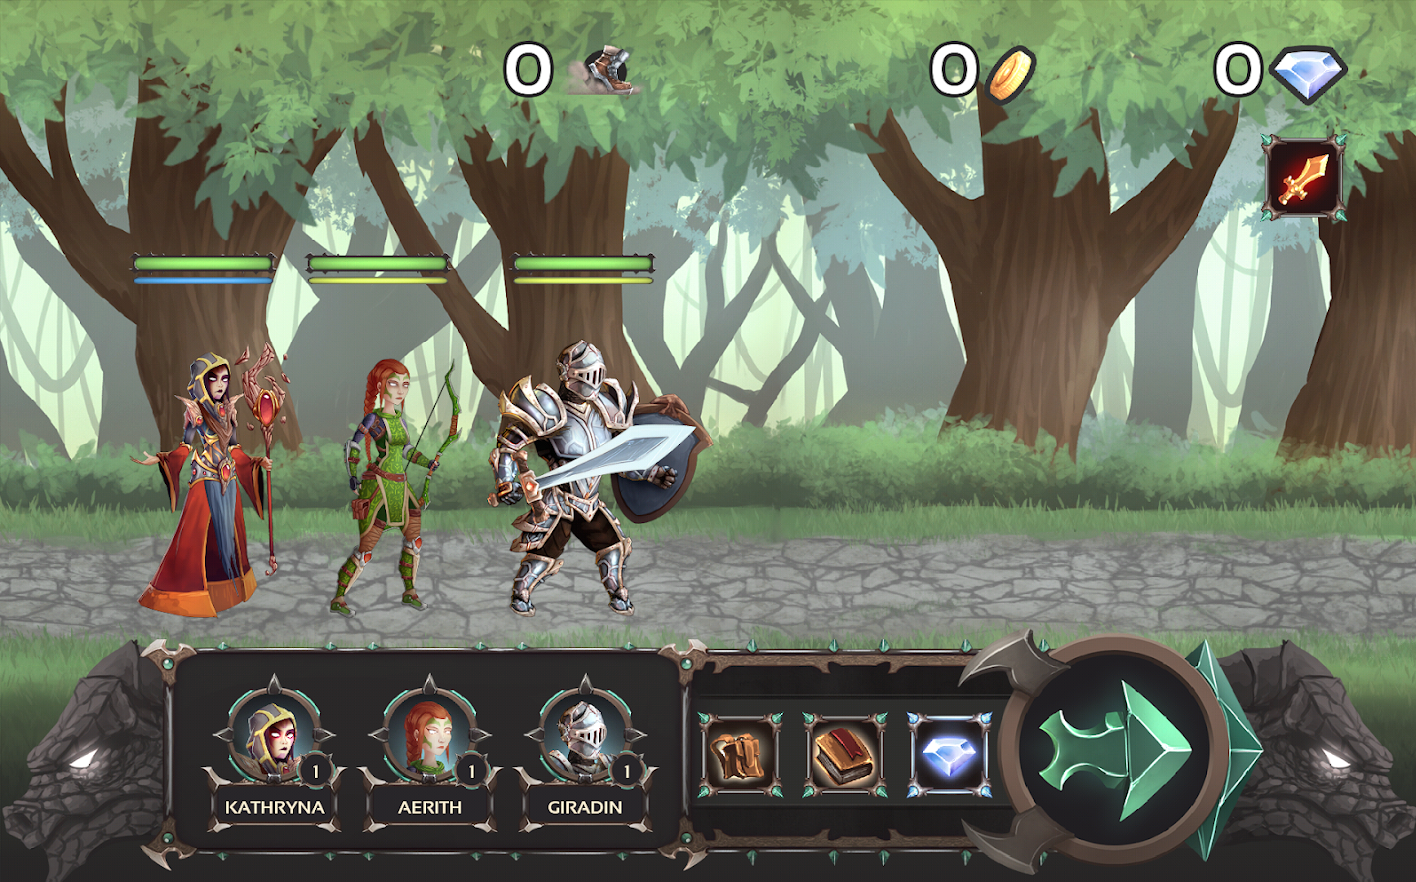 Adamant is a turn based RPG out now in beta.